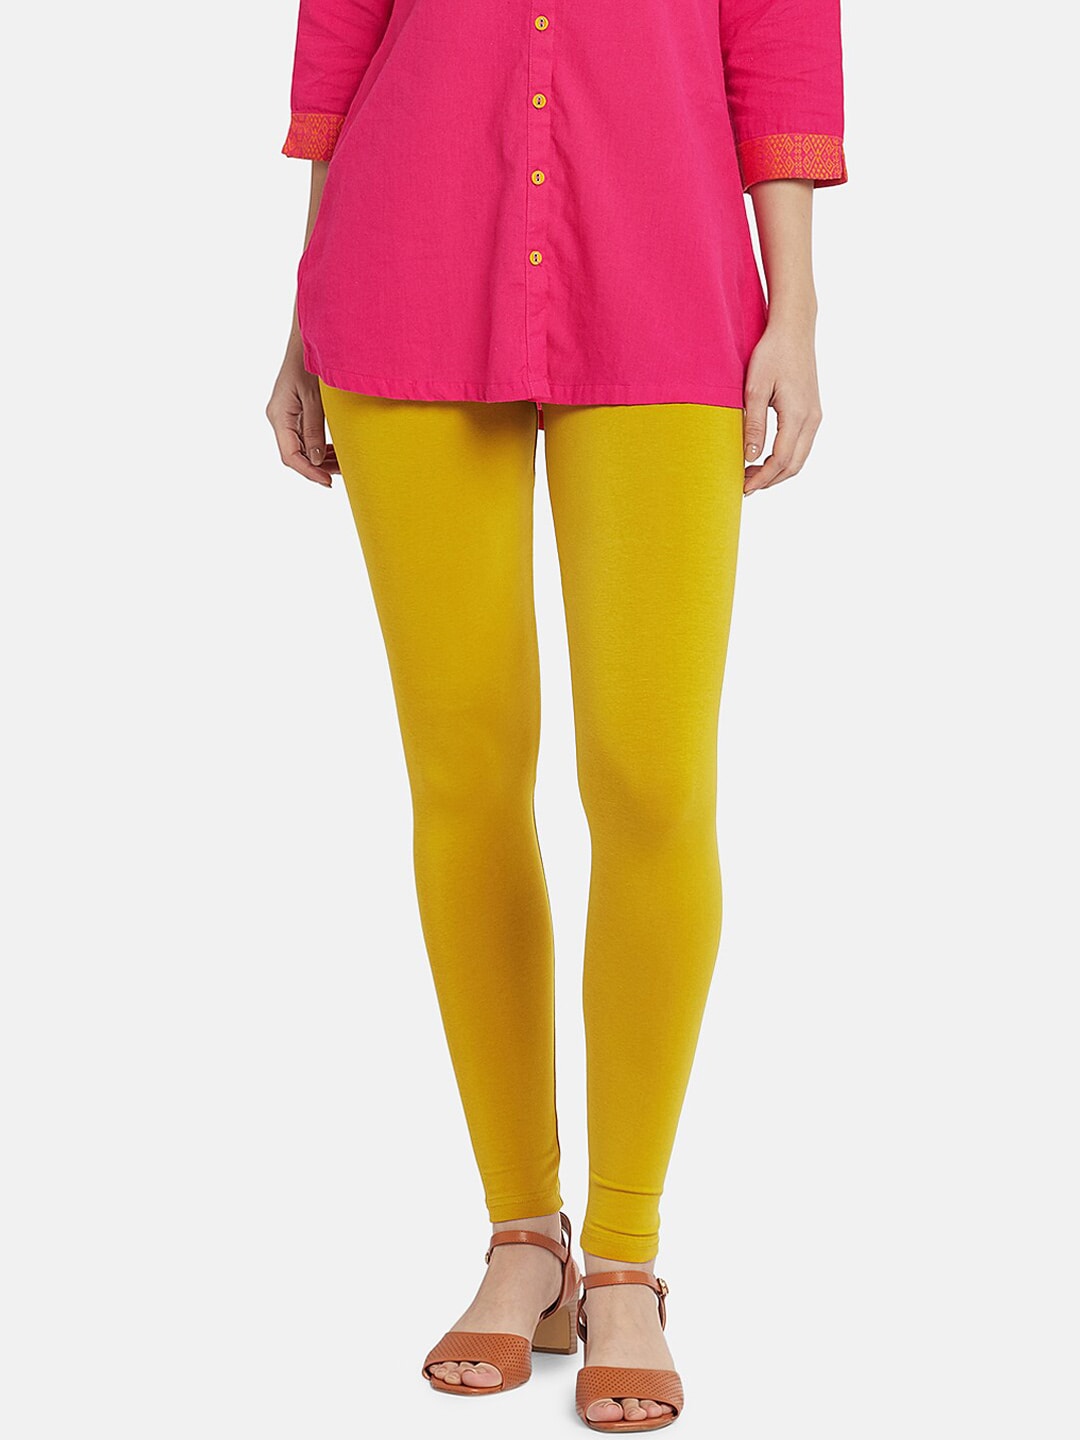 Go Colors Women Mustard Yellow Solid Ankle Length Slim Fit Leggings Price  in India, Full Specifications & Offers